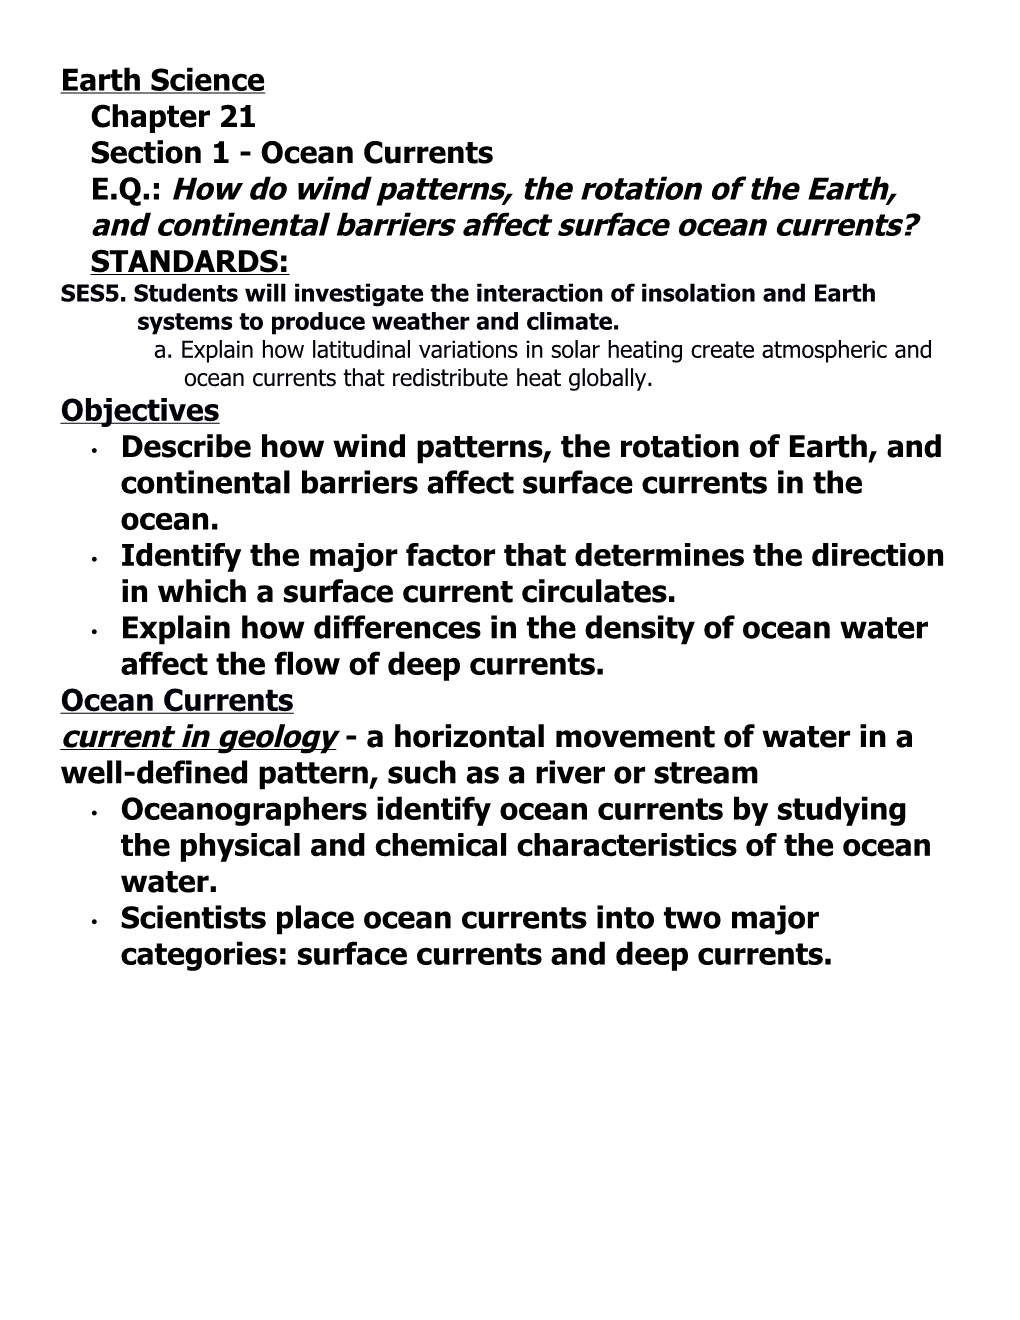 Section 1 - Ocean Currents